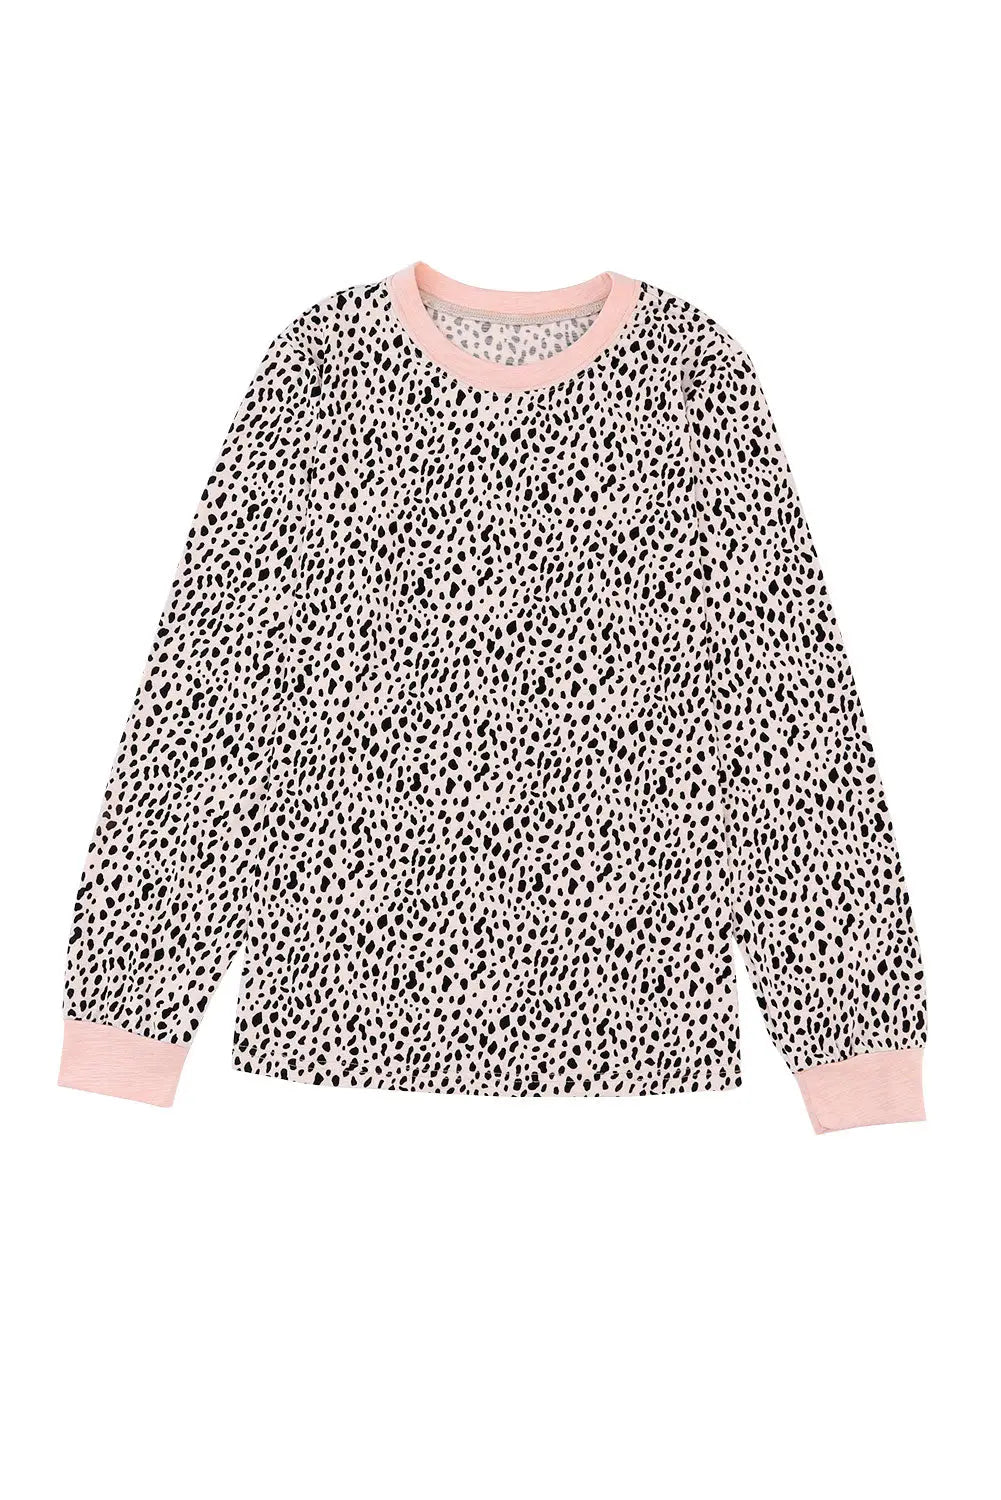 Animal Spotted Print Round Neck Long Sleeve Top-19